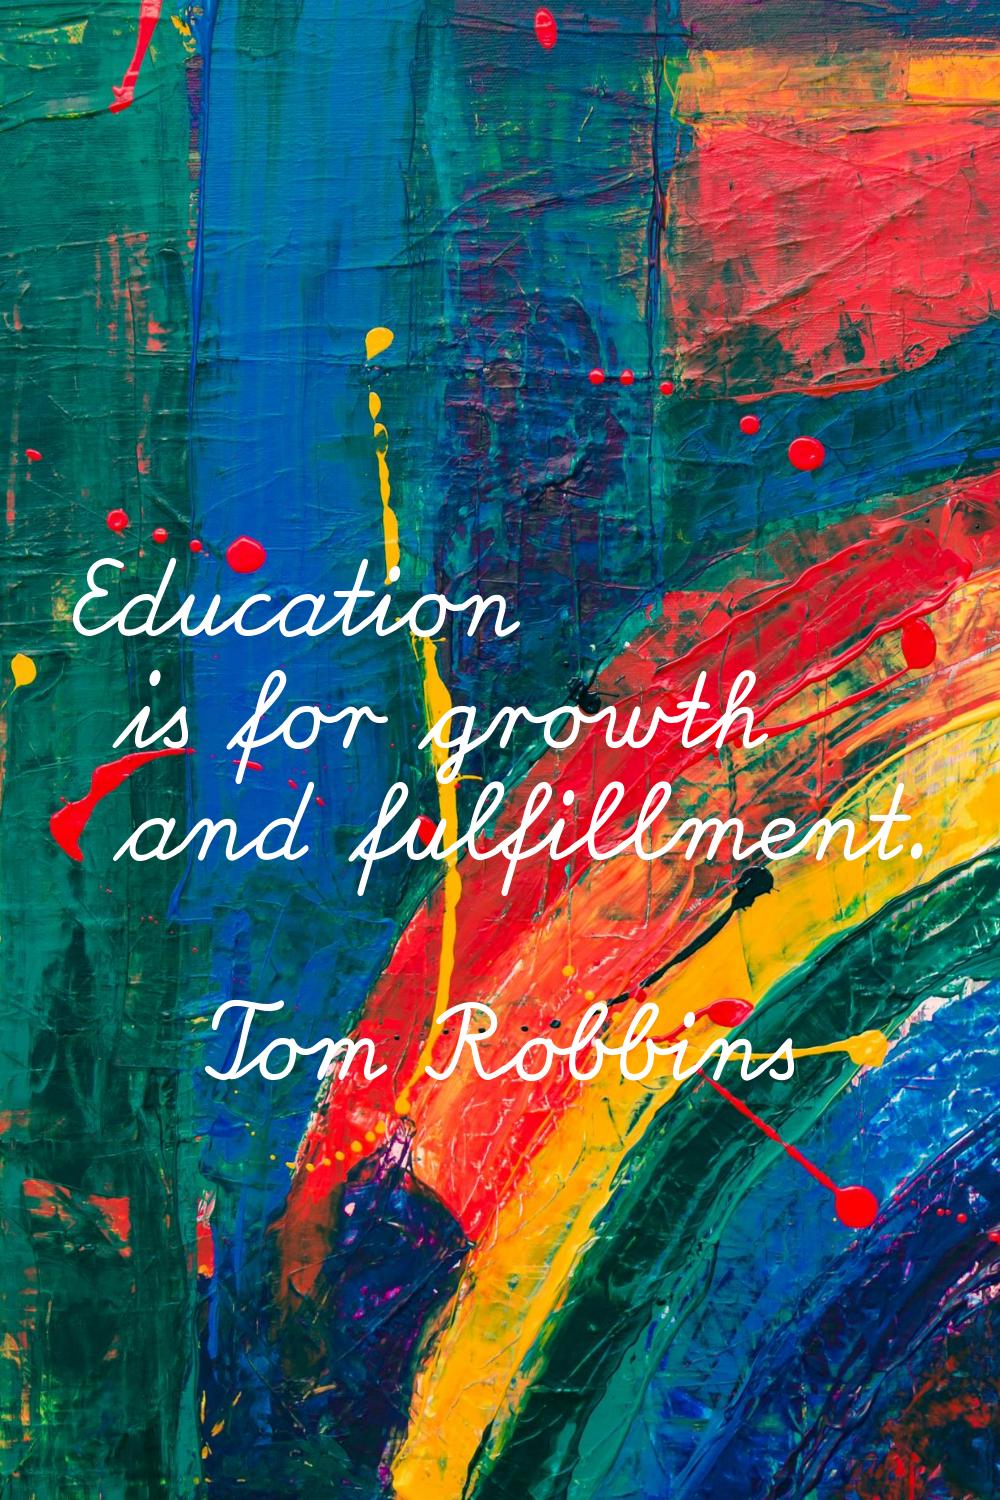 Education is for growth and fulfillment.